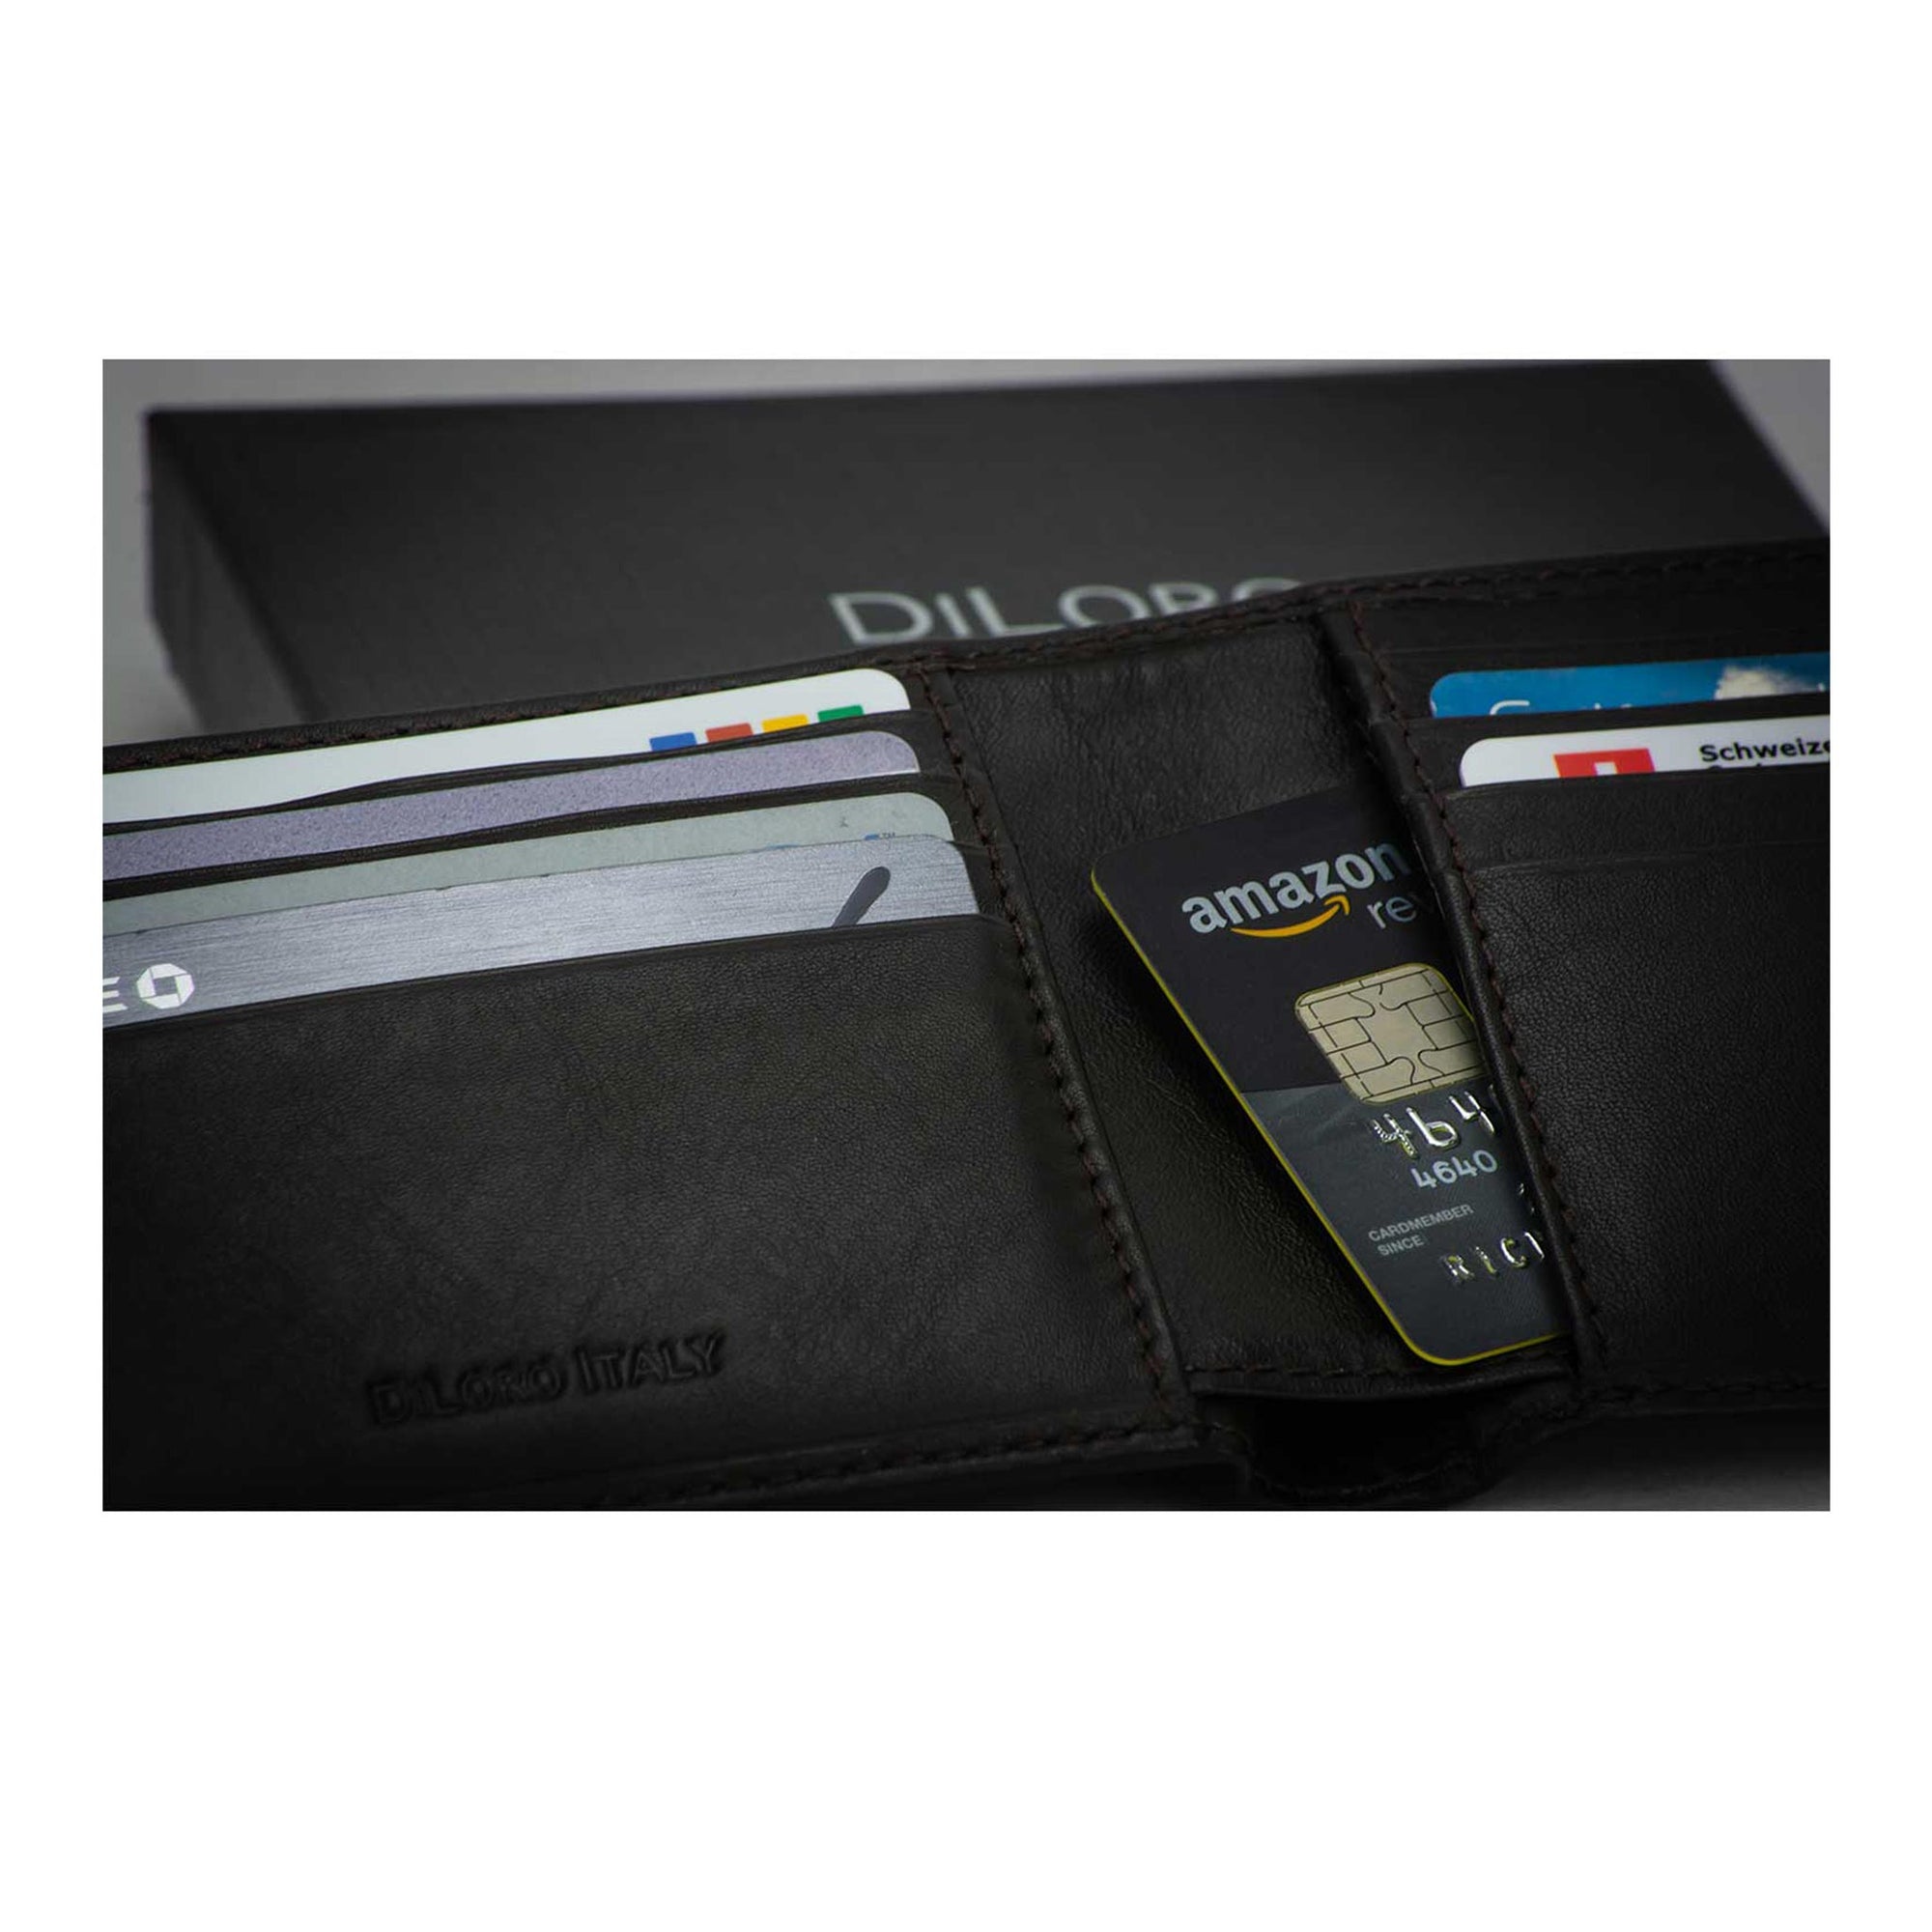 Wallet by DiLoro Italy Genuine Leather Slim Bifold Men's Wallet with RFID Blocking Technology in Dark Brown with Gift Box